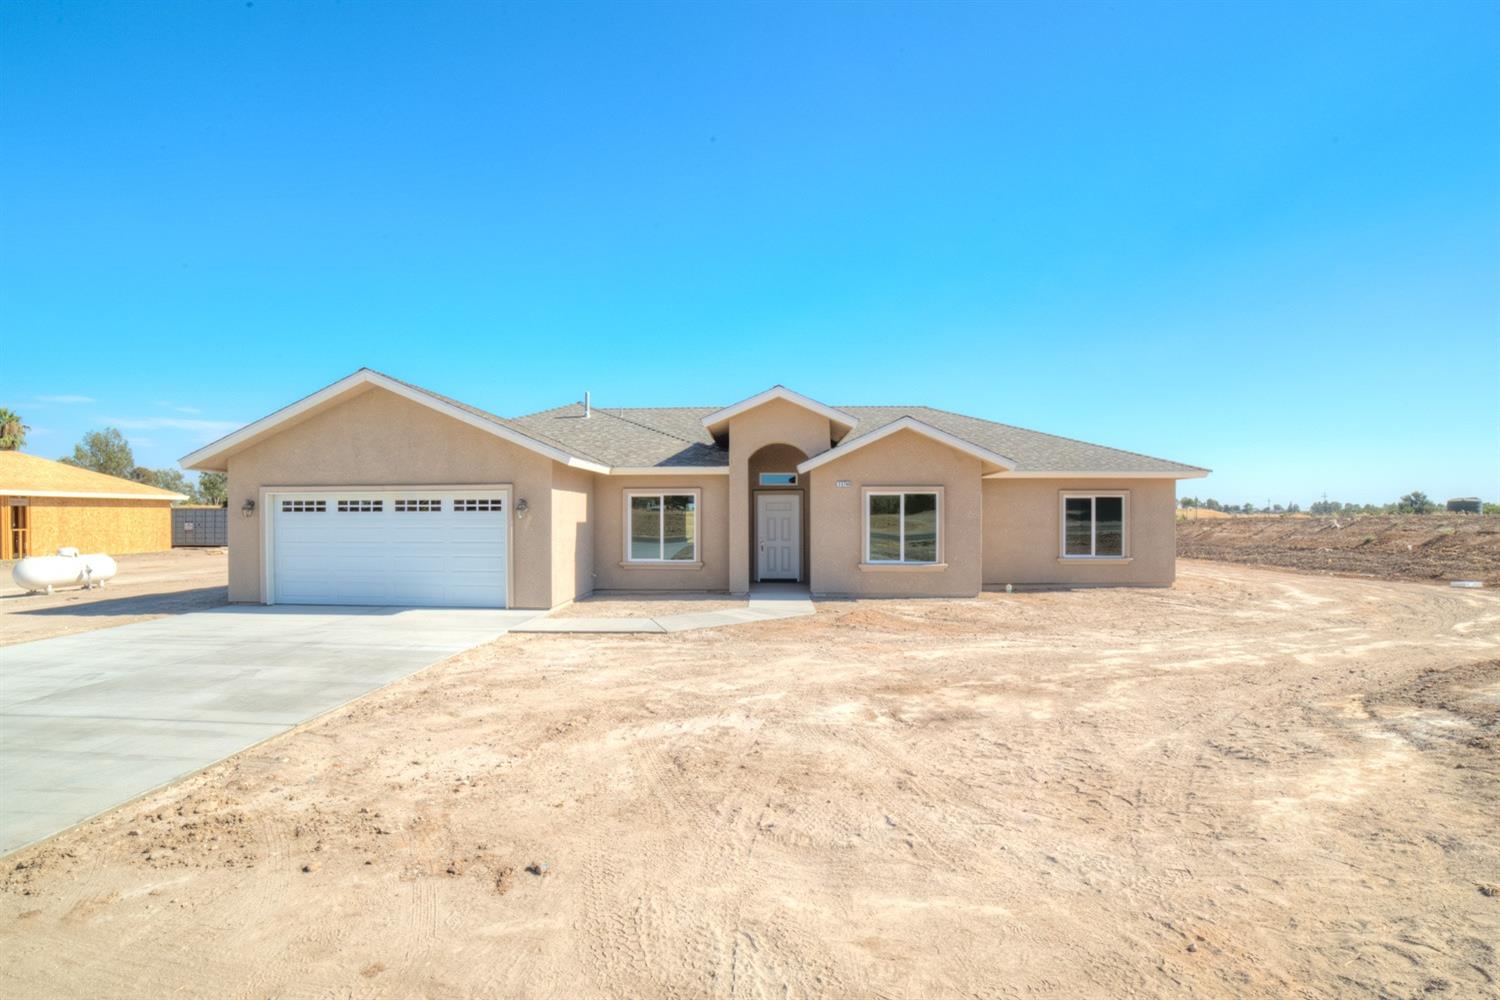 Photo of 30974 Ave 21 in Madera, CA